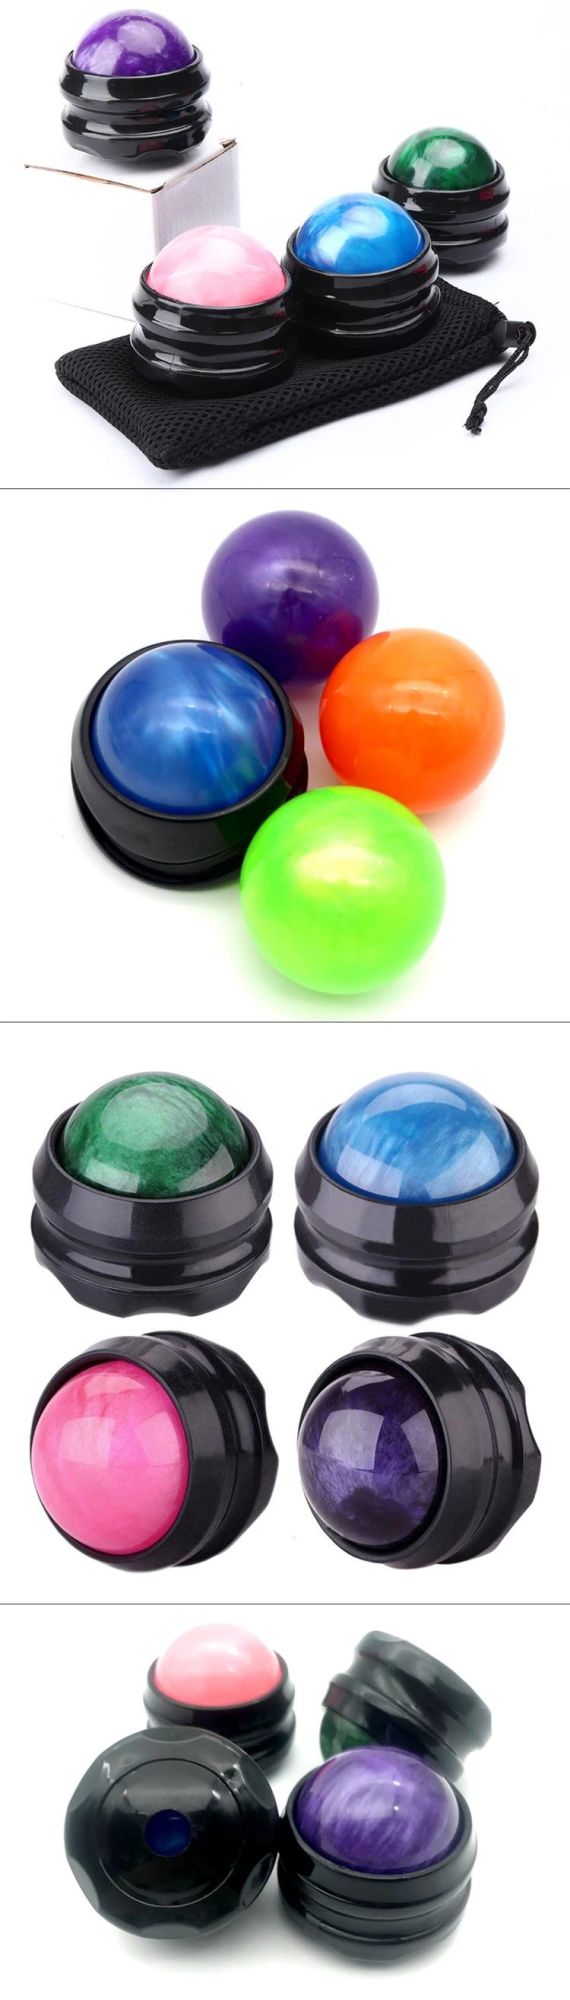 Stainless Steel Cold Massage Roller Ball Heat and Ice Therapy Roller Massage Ball